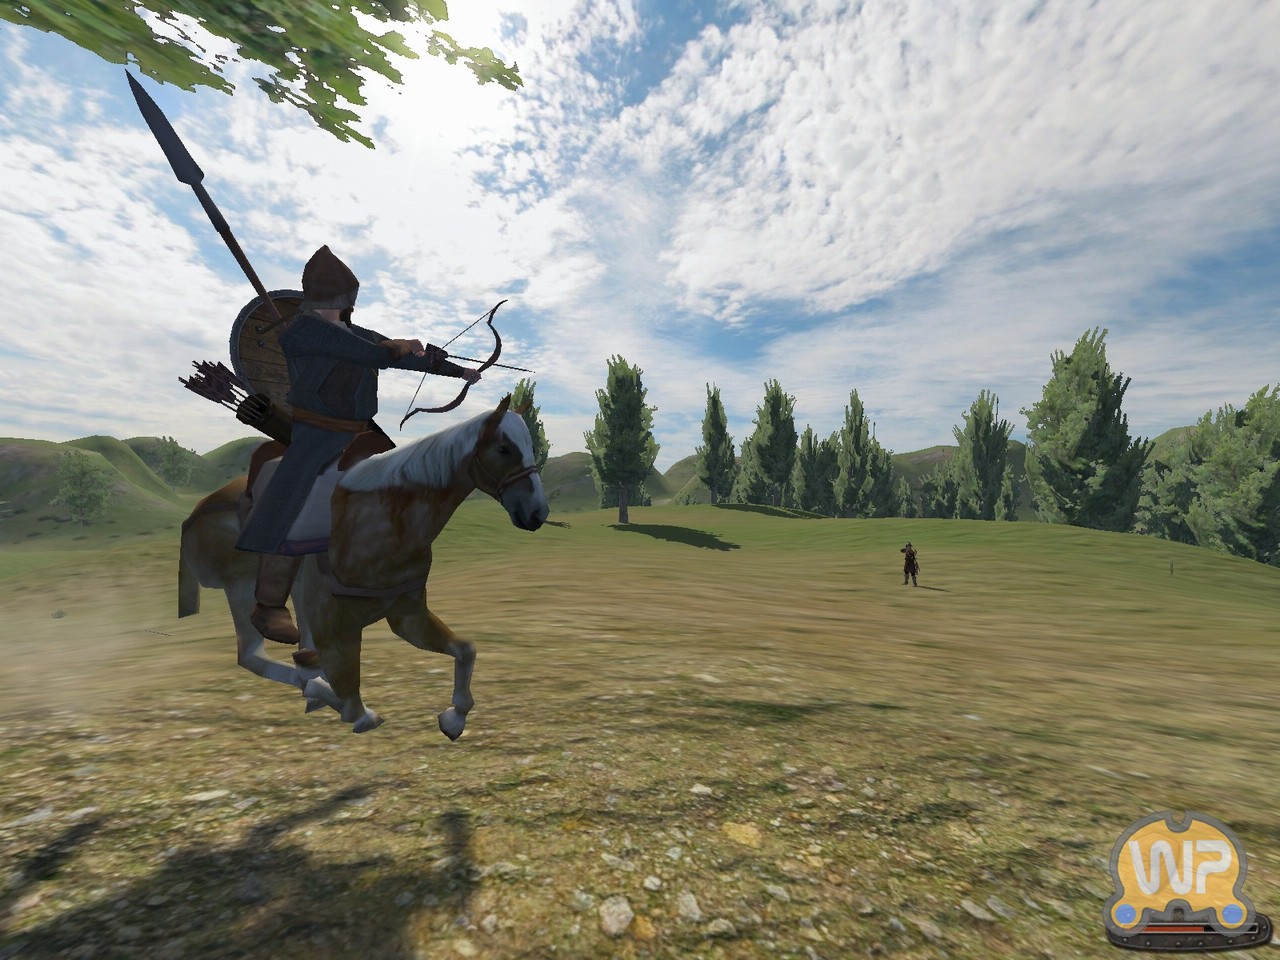 Mount and blade game. Маунт блейд игра. Mount and Blade (PC). Маунтин блейд 3. Игра про рыцарей Mount Blade.